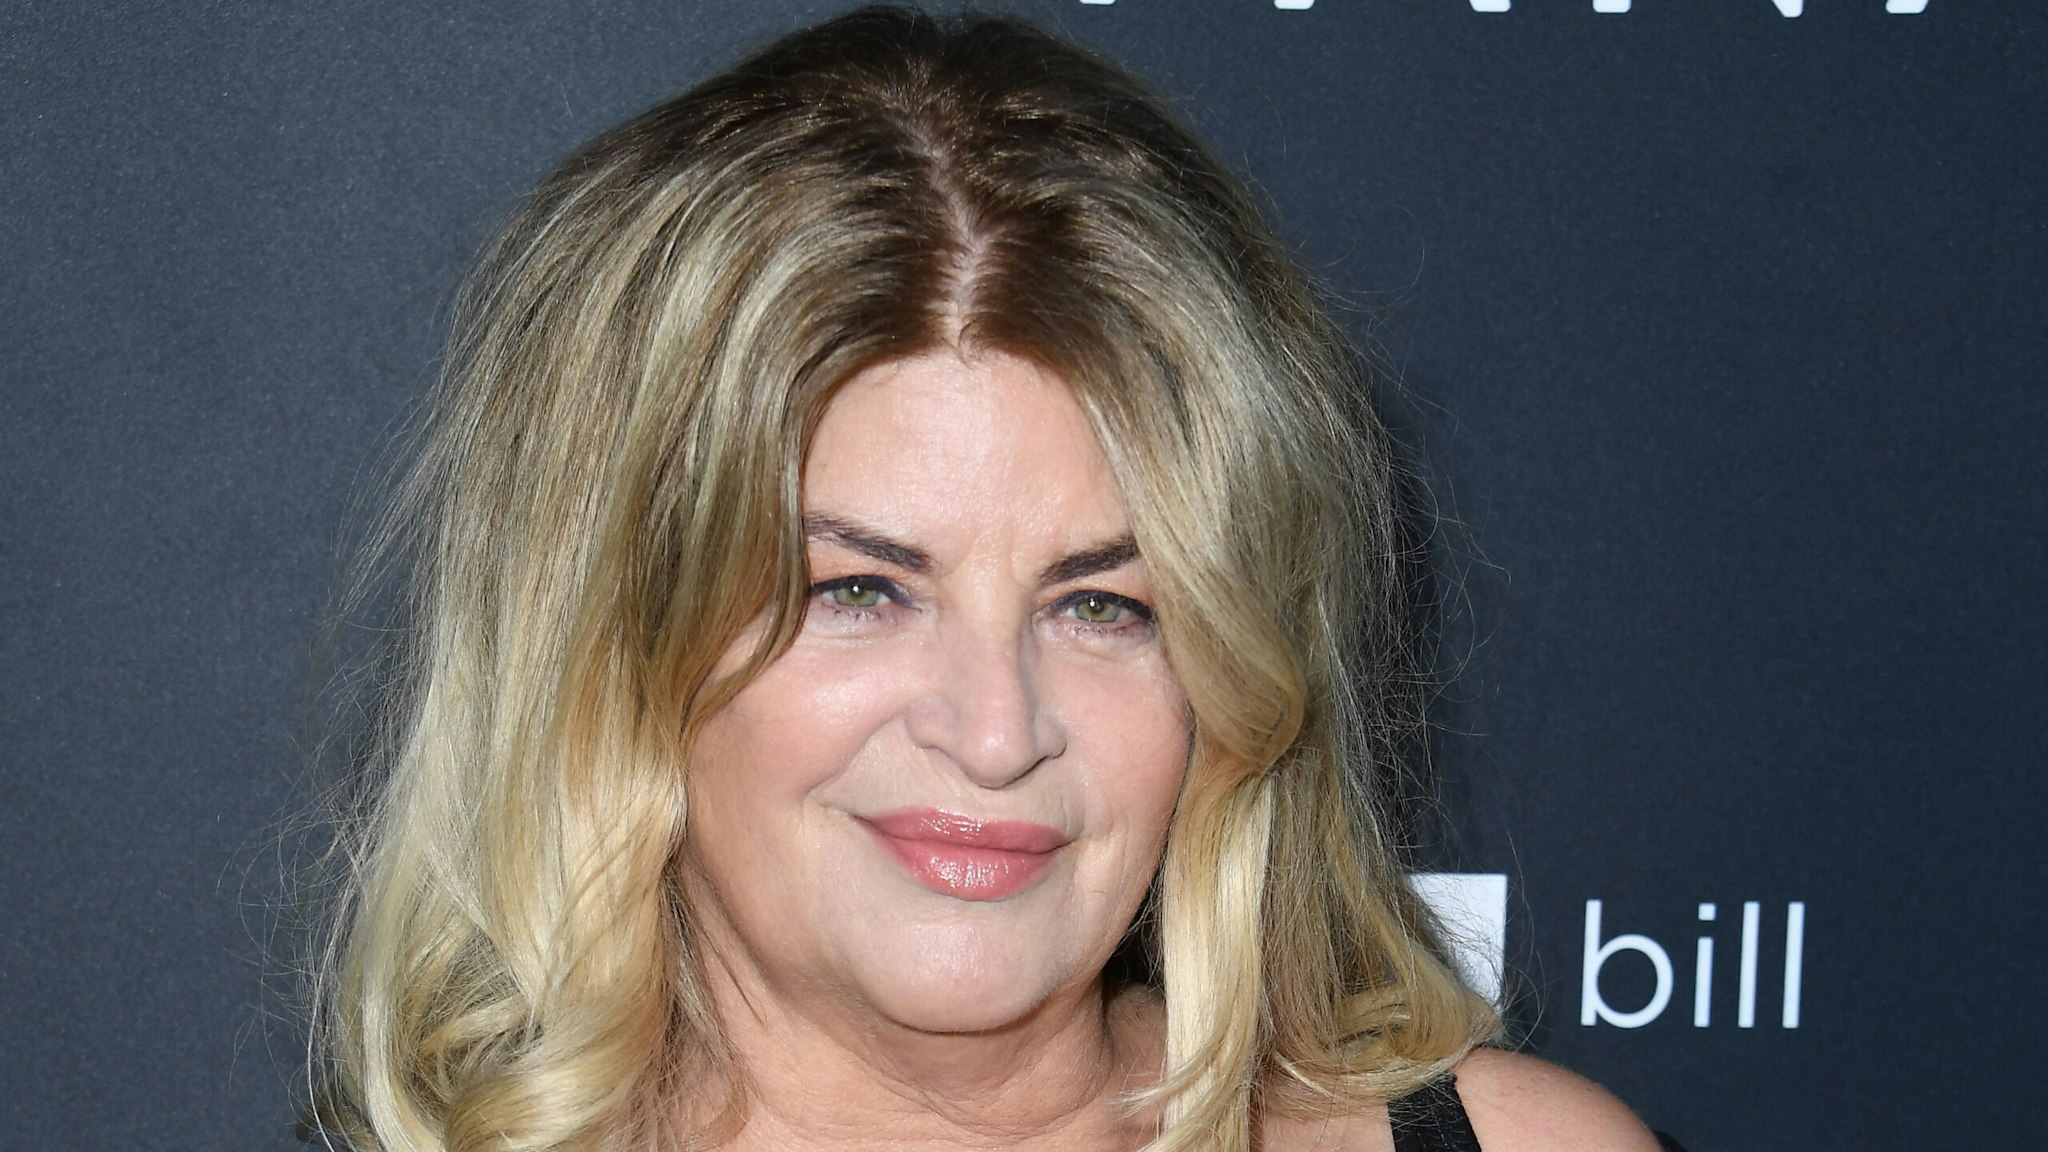 HOLLYWOOD, CALIFORNIA - AUGUST 22: Kirstie Alley arrives at the Premiere Of Quiver Distribution's "The Fanatic" at the Egyptian Theatre on August 22, 2019 in Hollywood, California.